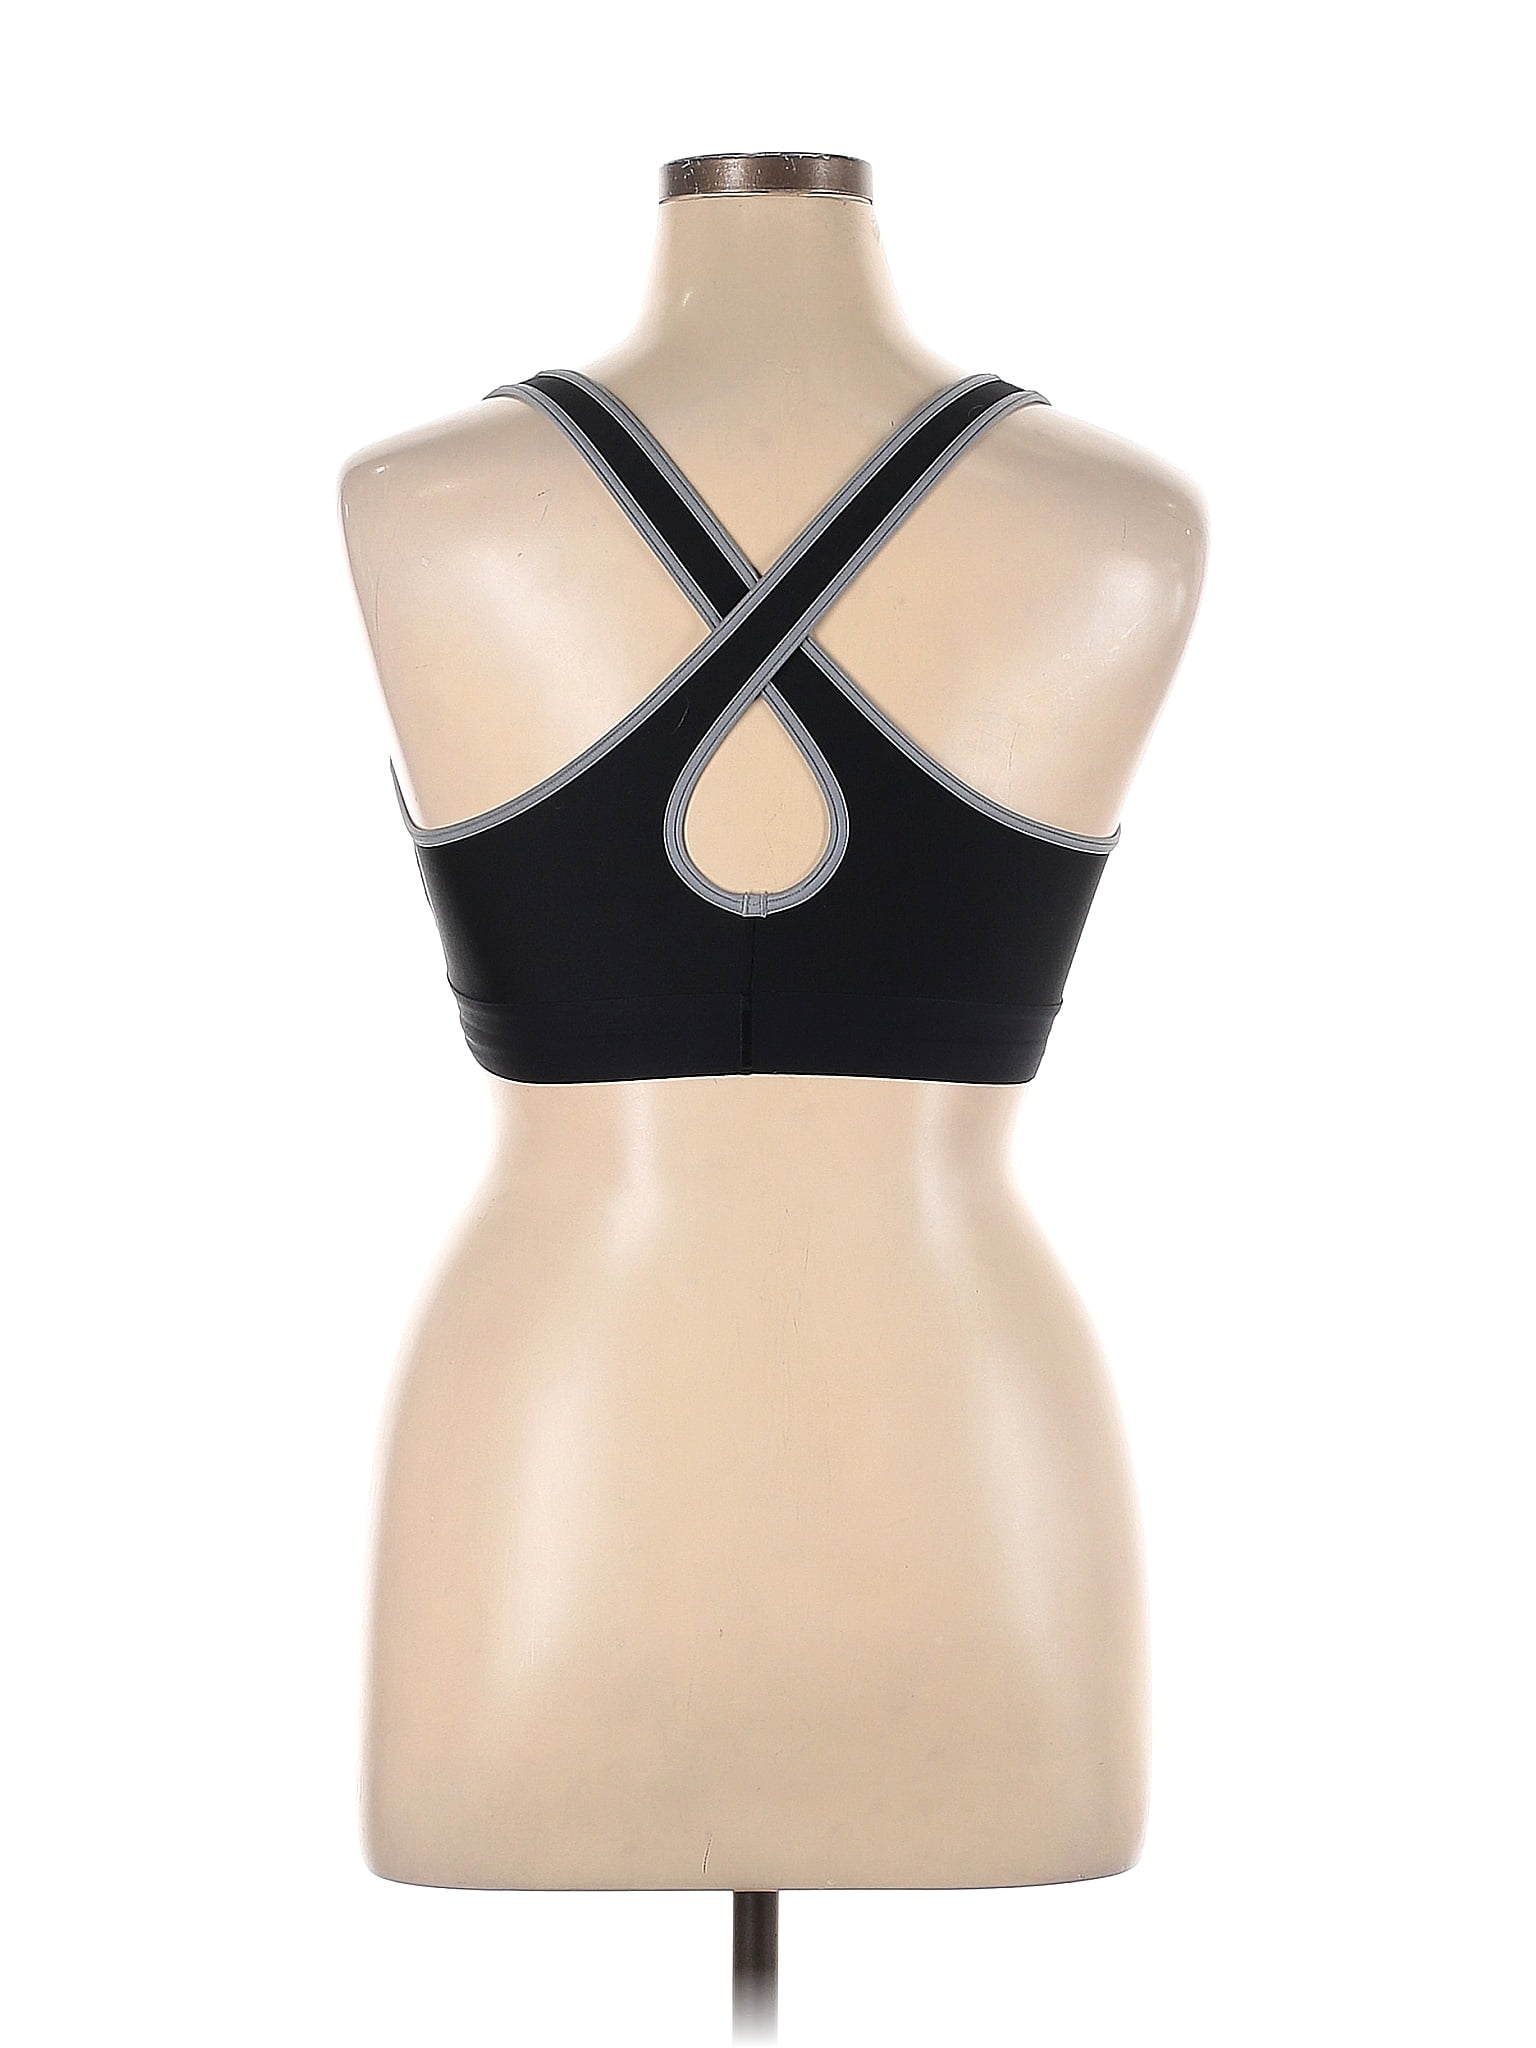 Under Armour Color Block Graphic Silver Sports Bra Size XL - 48